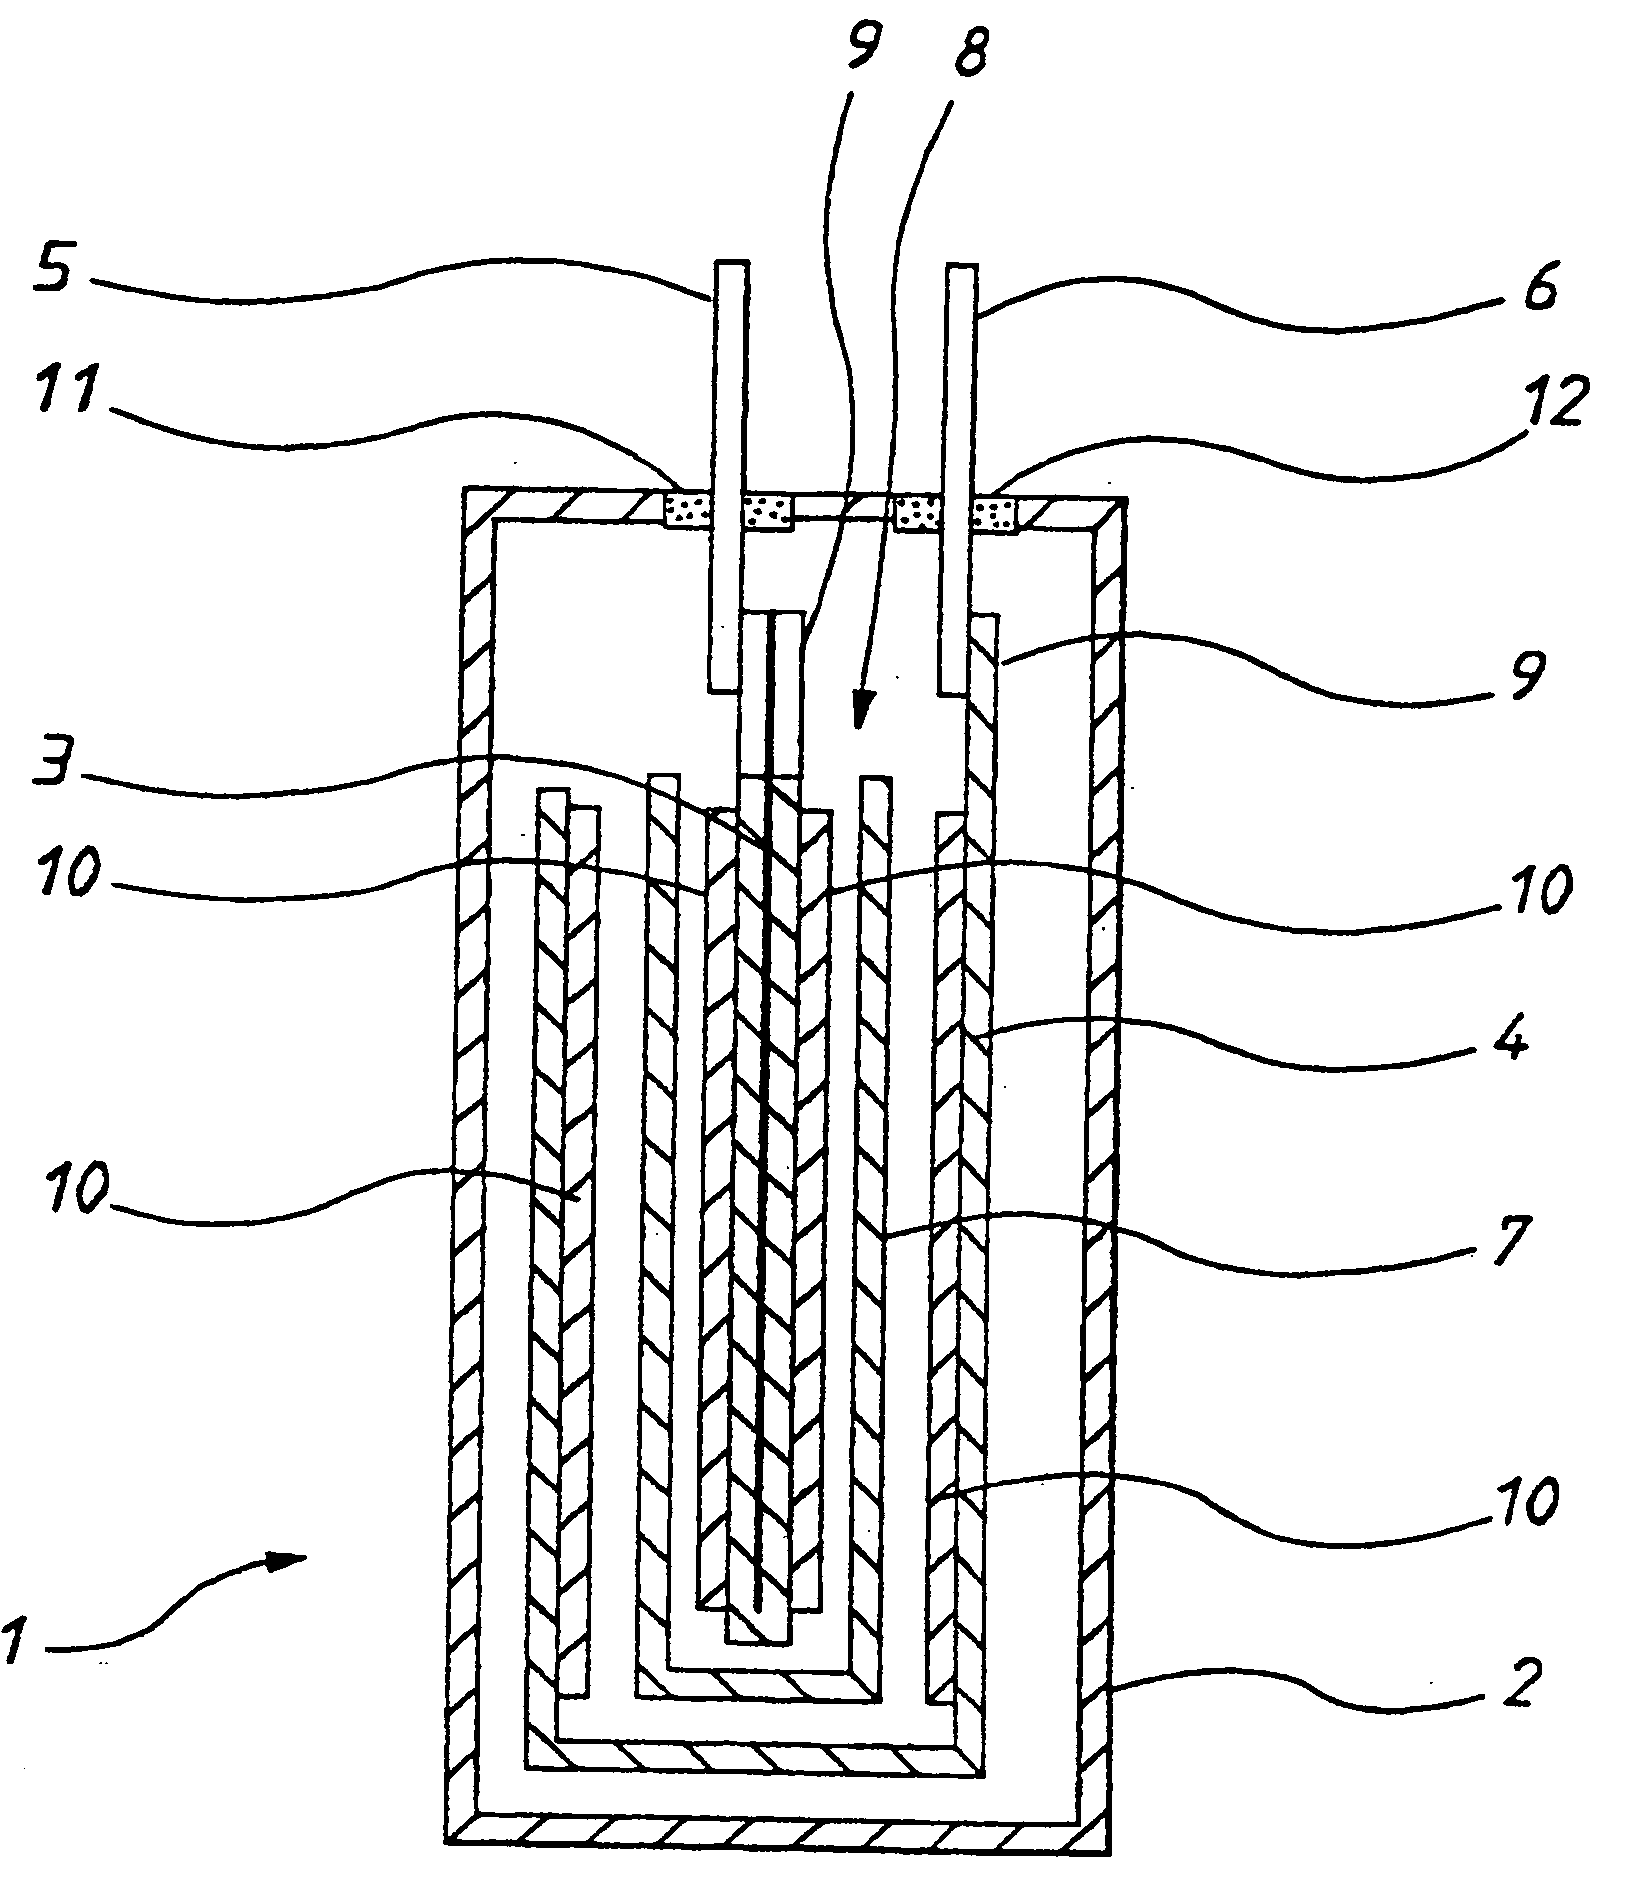 Charge storage device